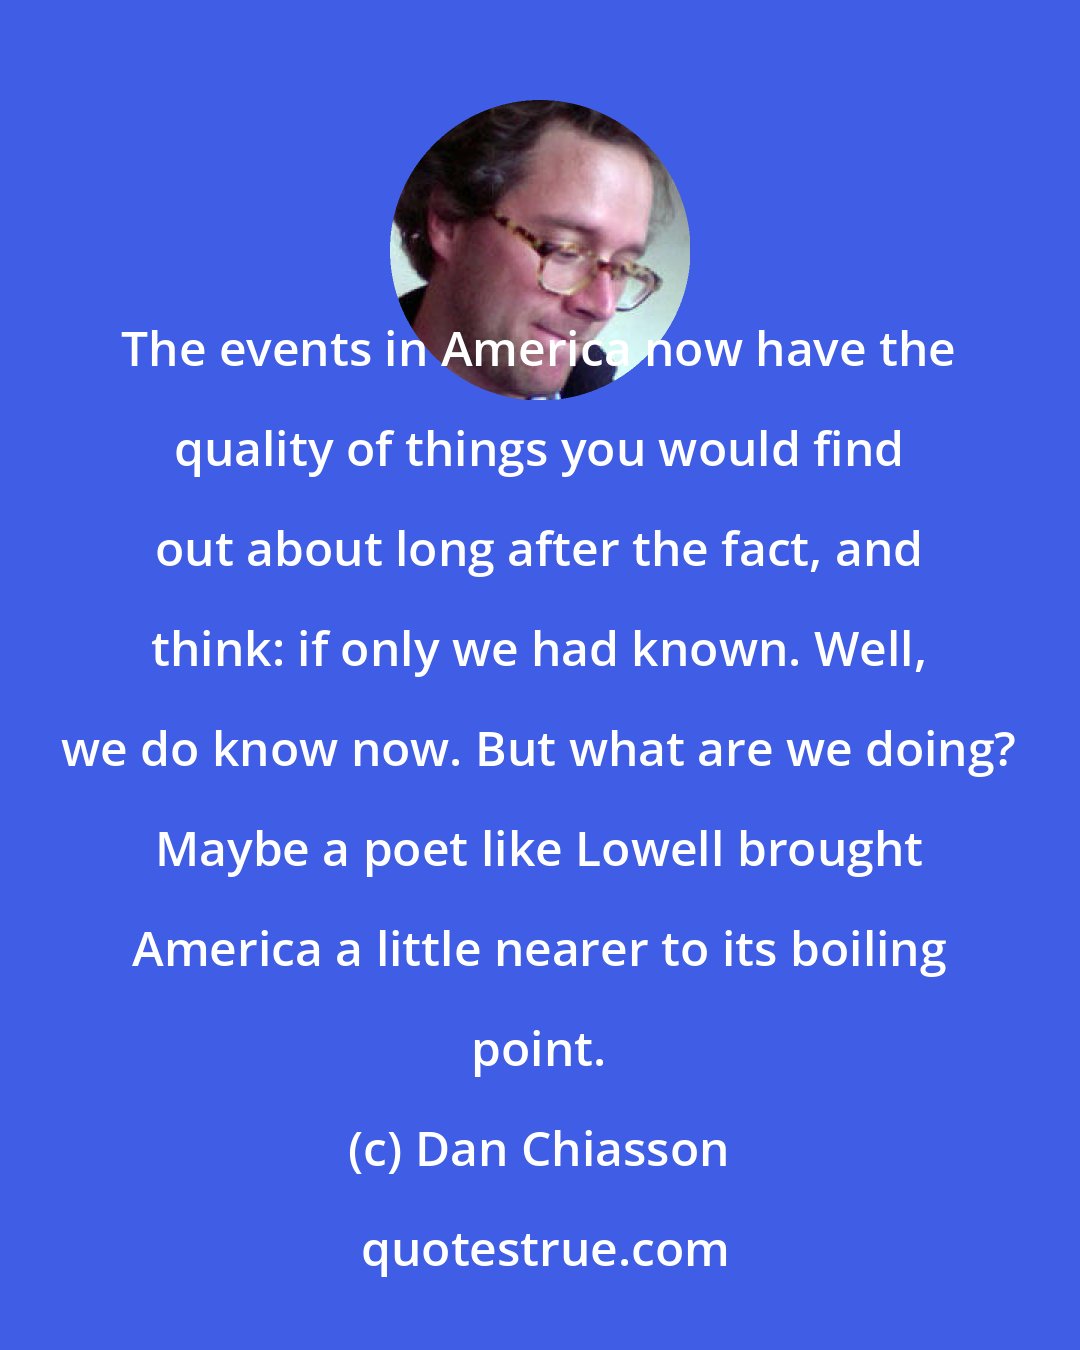 Dan Chiasson: The events in America now have the quality of things you would find out about long after the fact, and think: if only we had known. Well, we do know now. But what are we doing? Maybe a poet like Lowell brought America a little nearer to its boiling point.